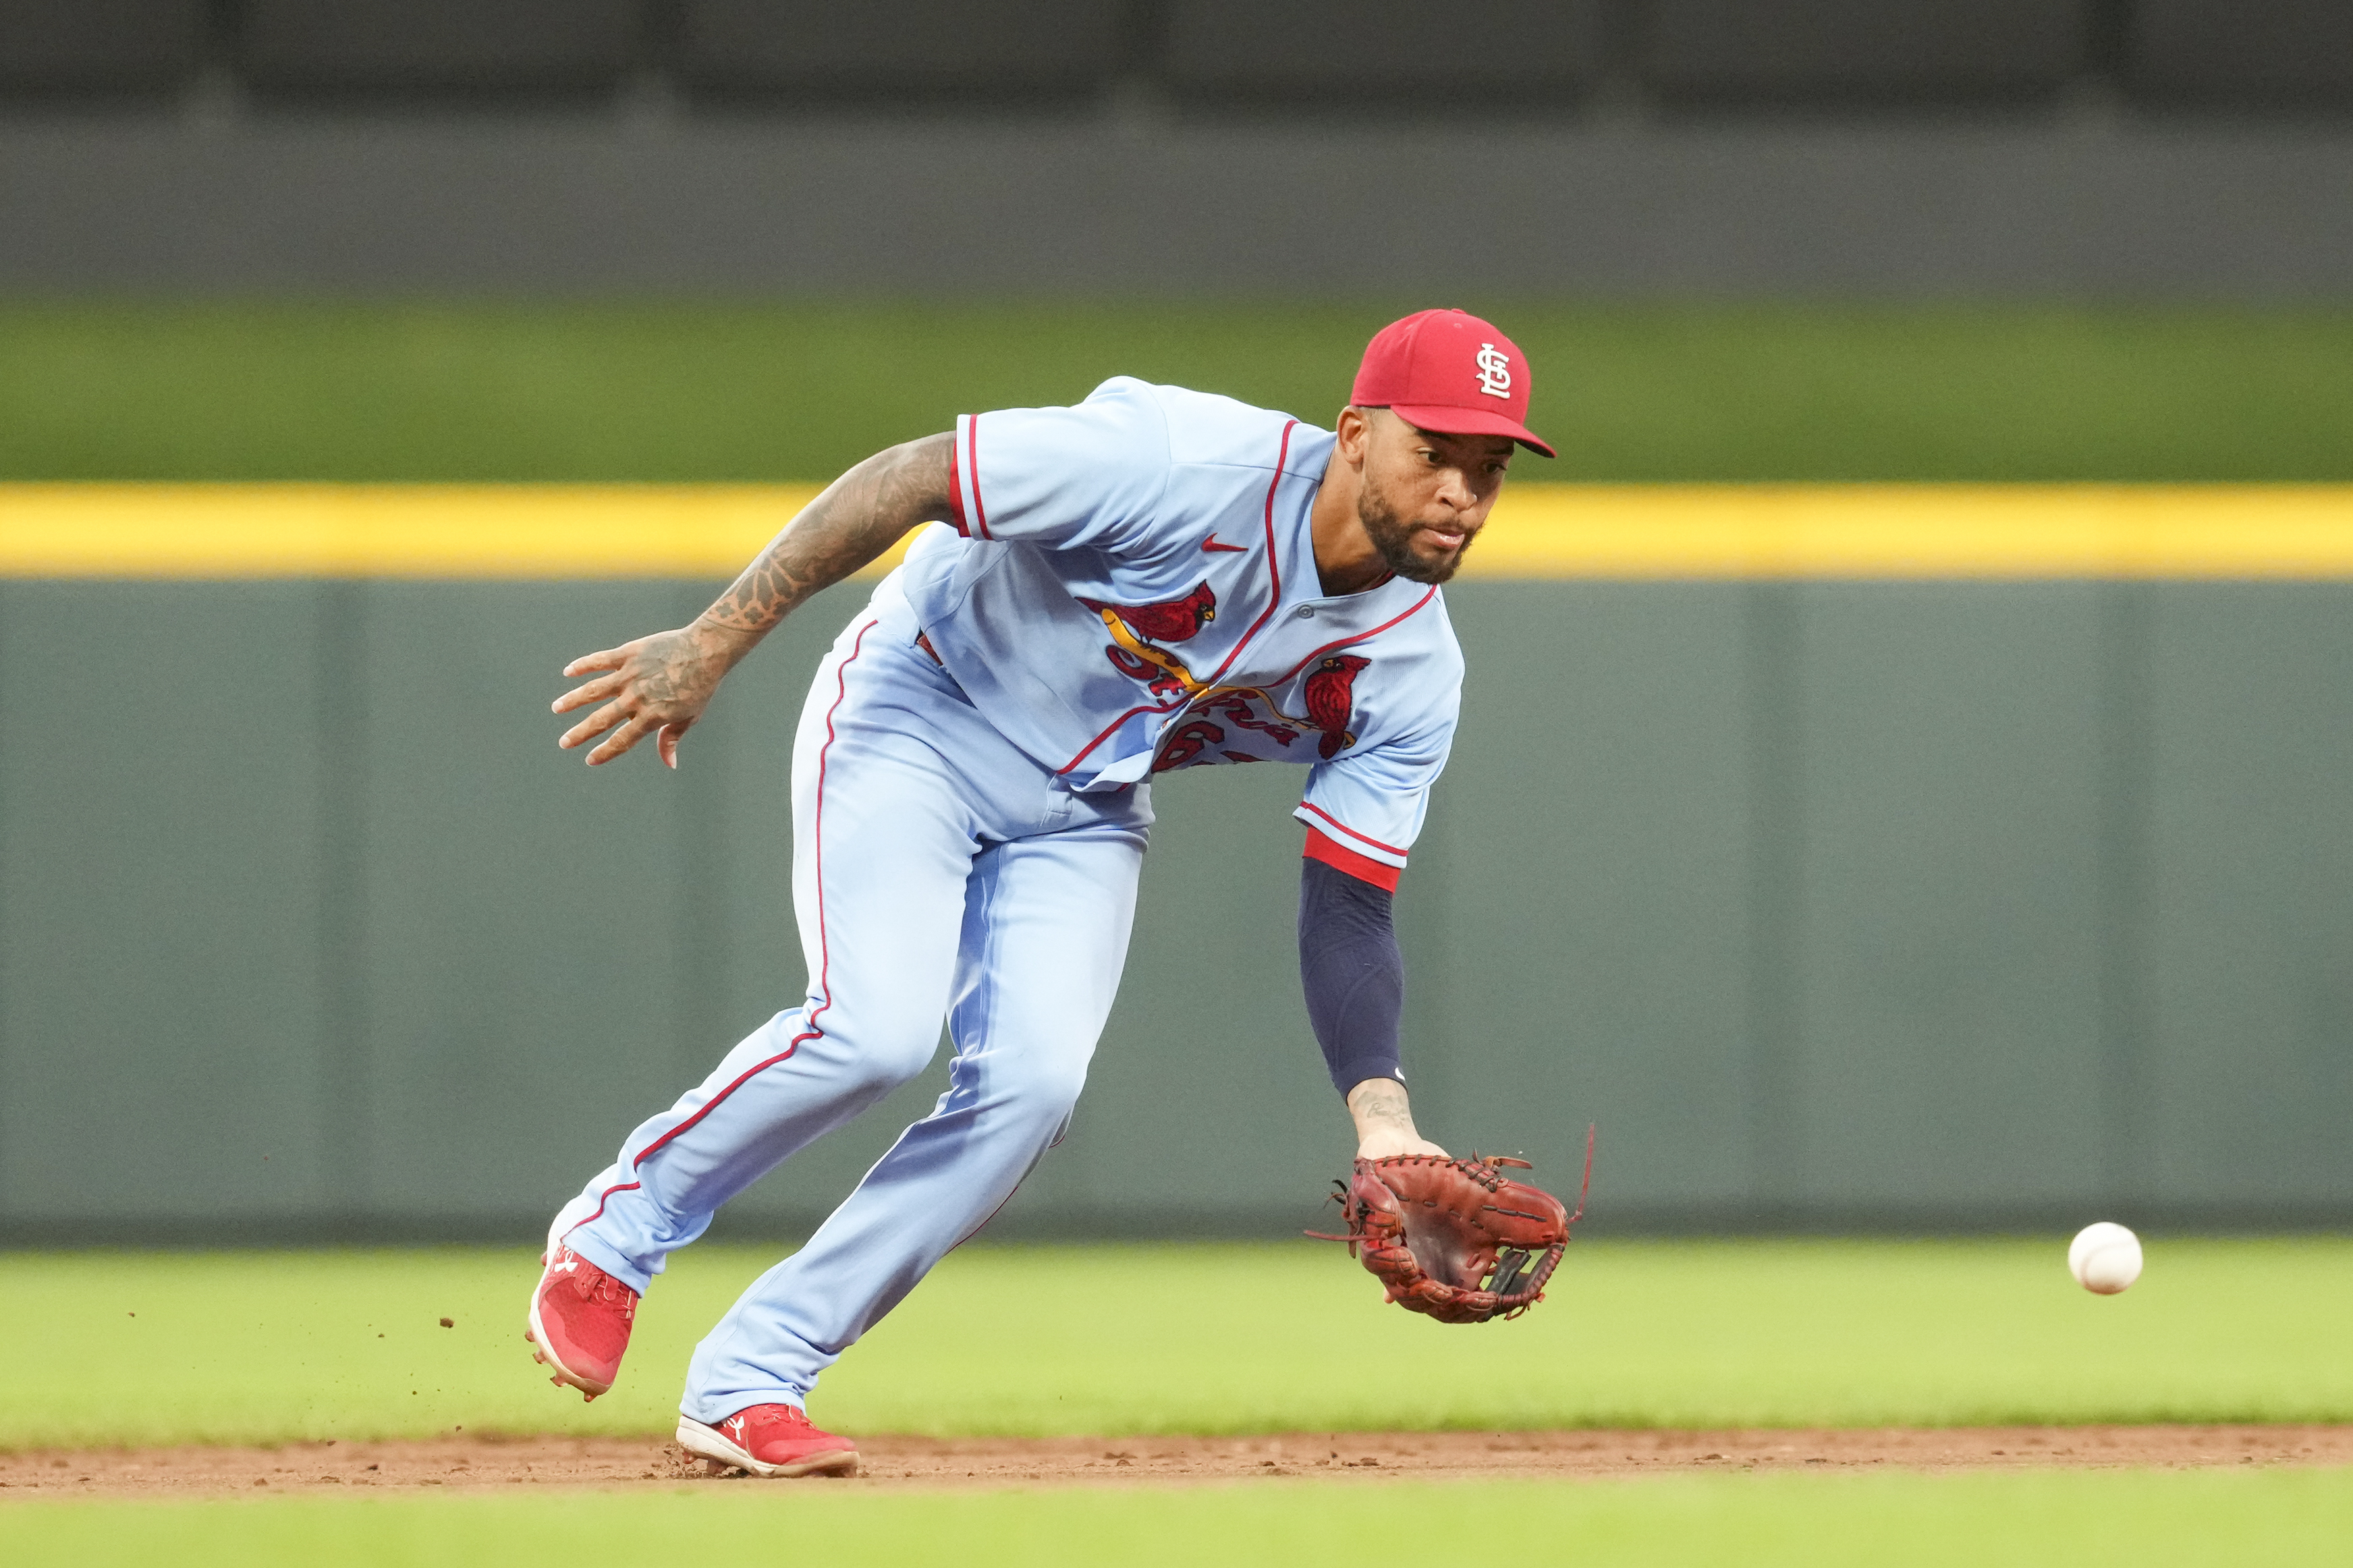 RUMOR: Cardinals outfielder emerges as Yankees trade candidate